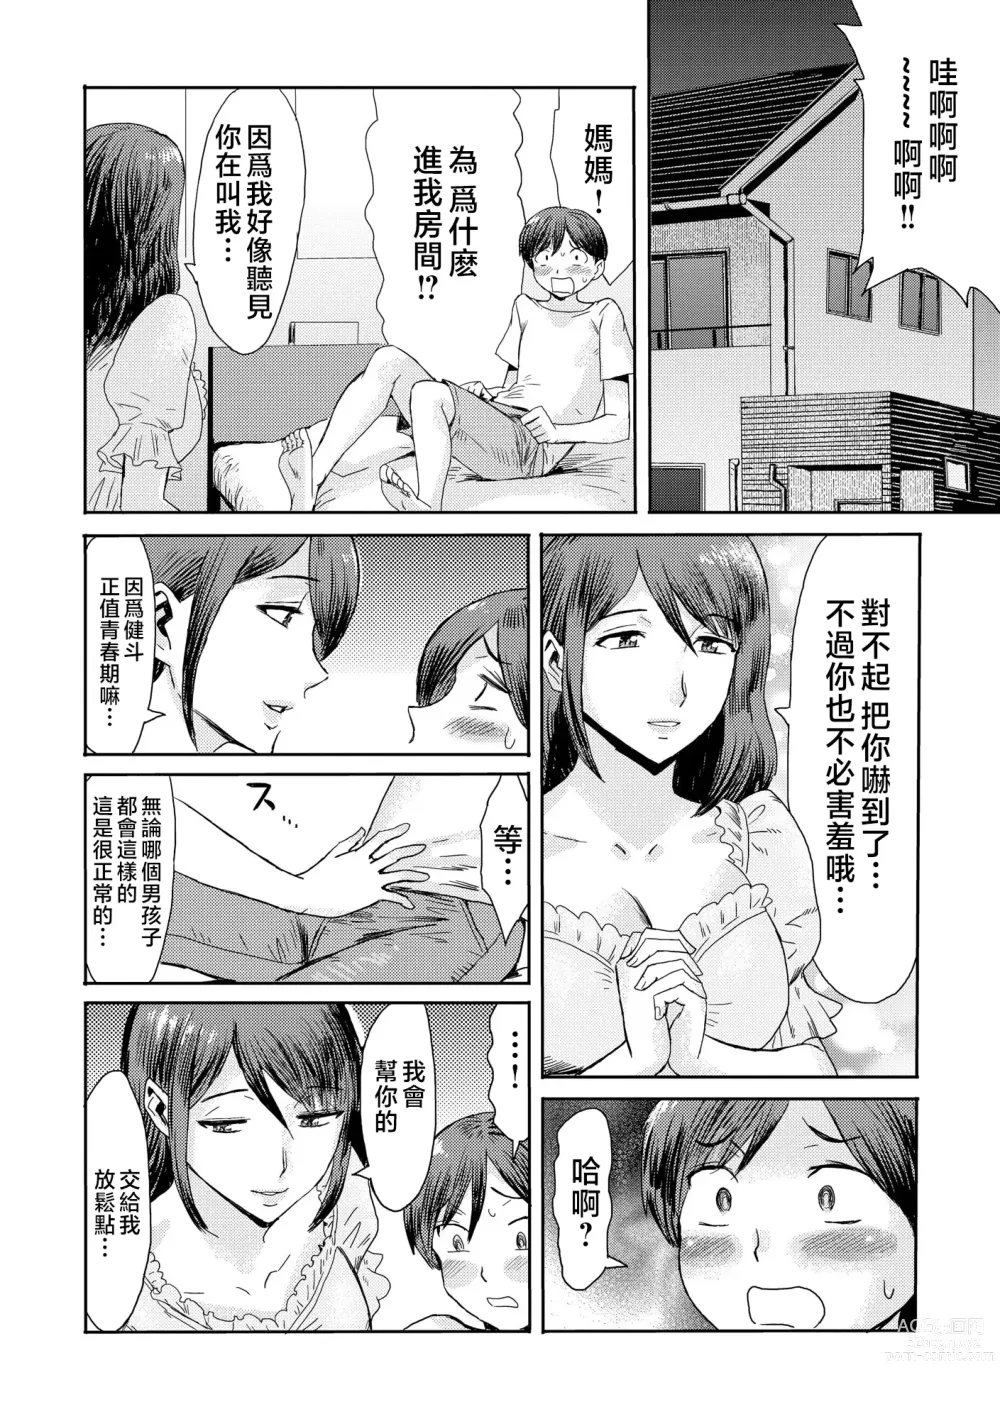 Page 5 of manga Soukan Syndrome Ch. 3 (decensored)